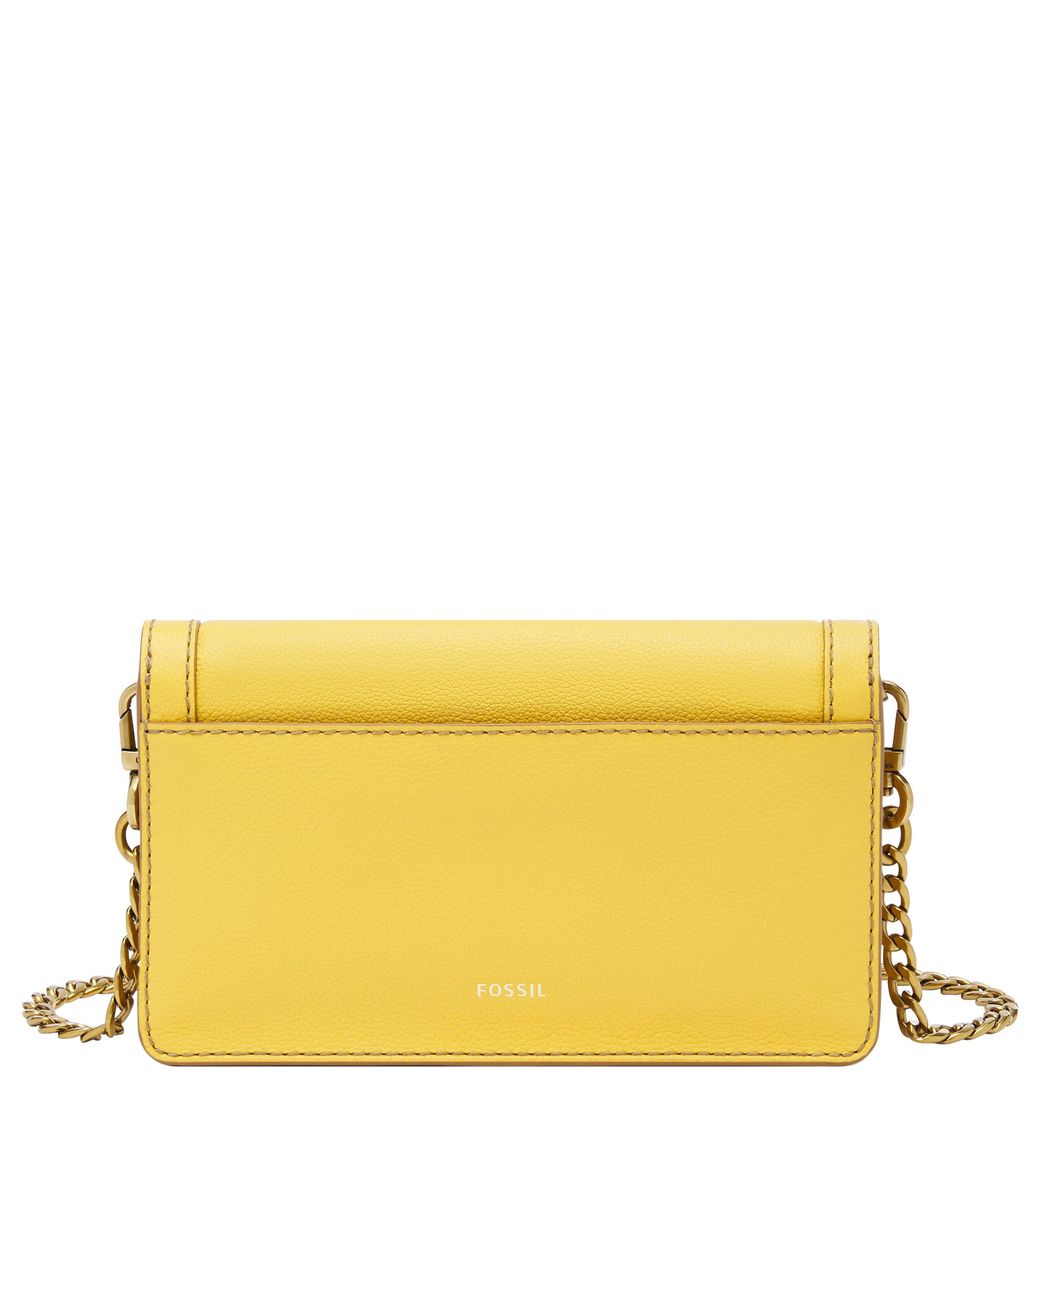 Fossil Ainsley Leather Wallet Crossbody in Yellow | Lyst